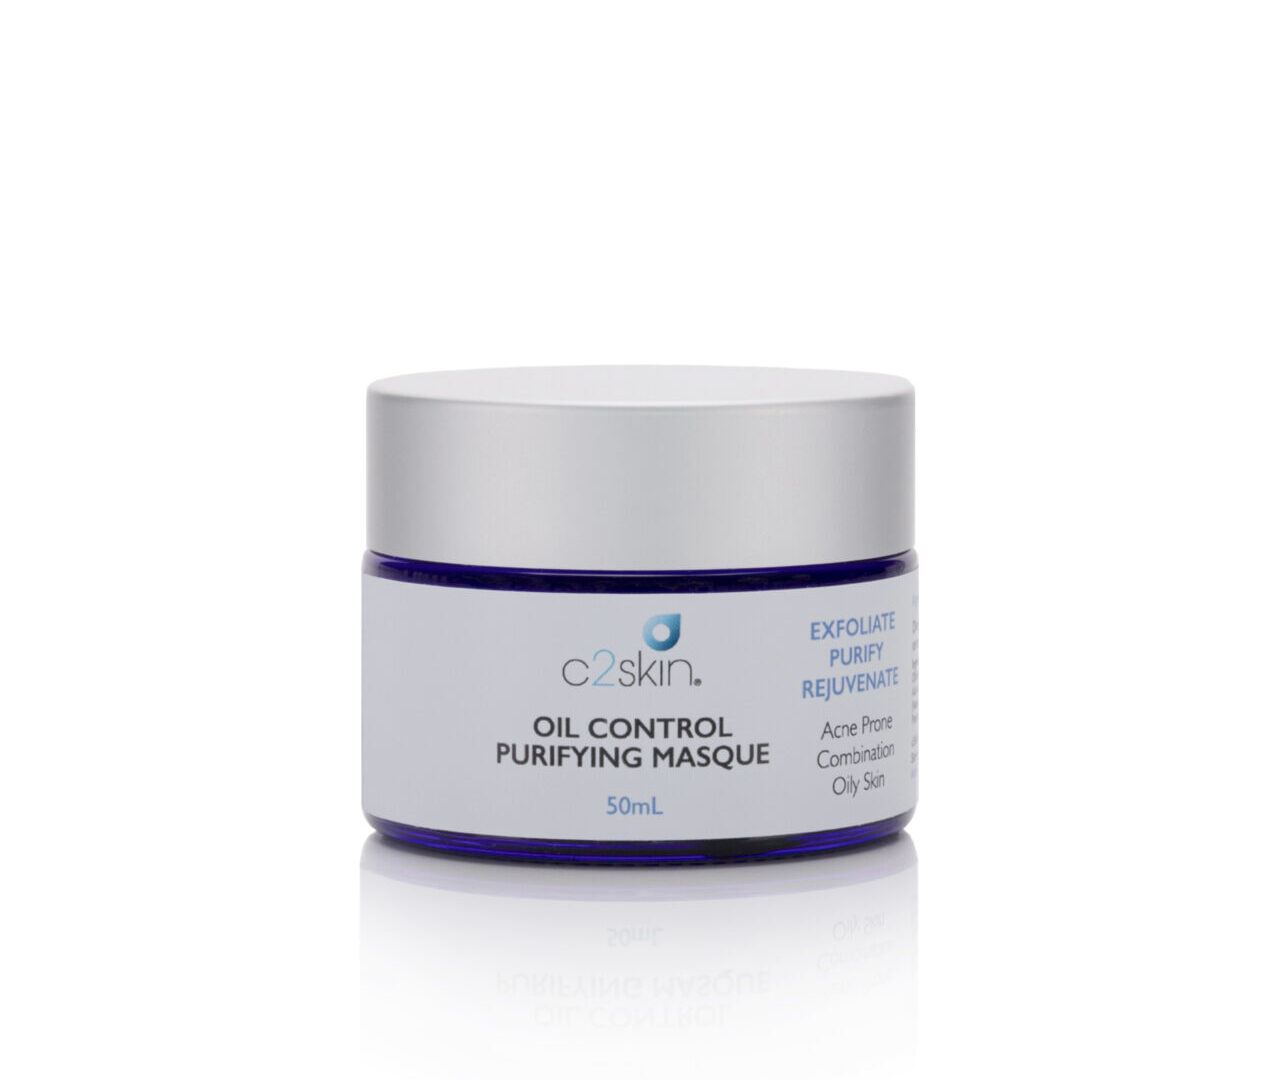 Oil Control Purifying Masque 50mL